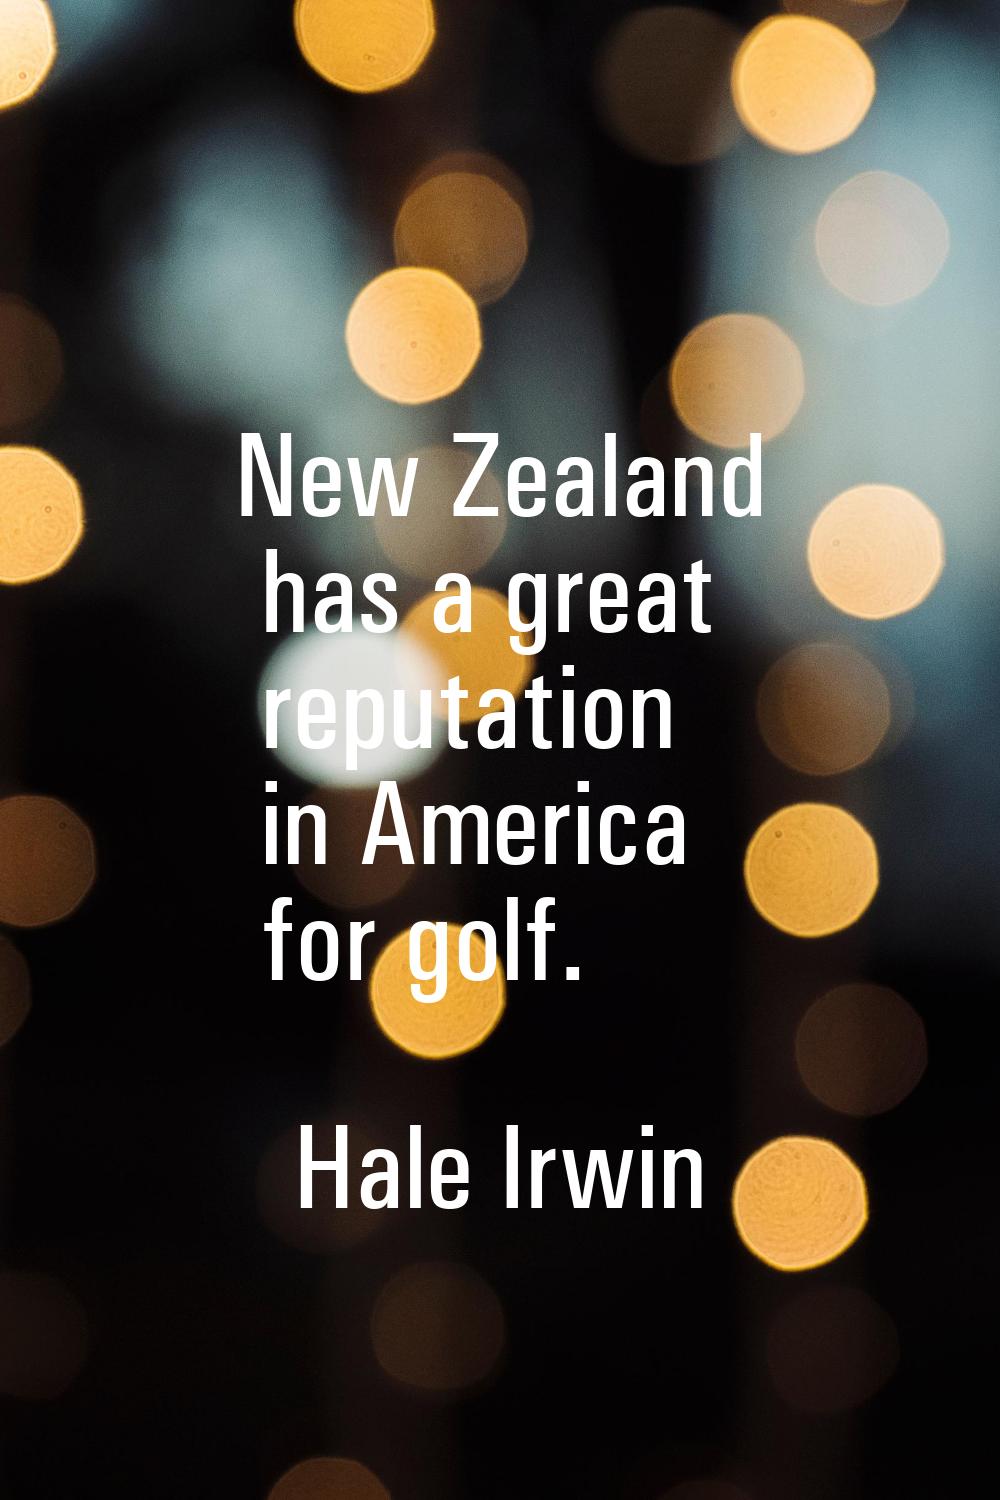 New Zealand has a great reputation in America for golf.